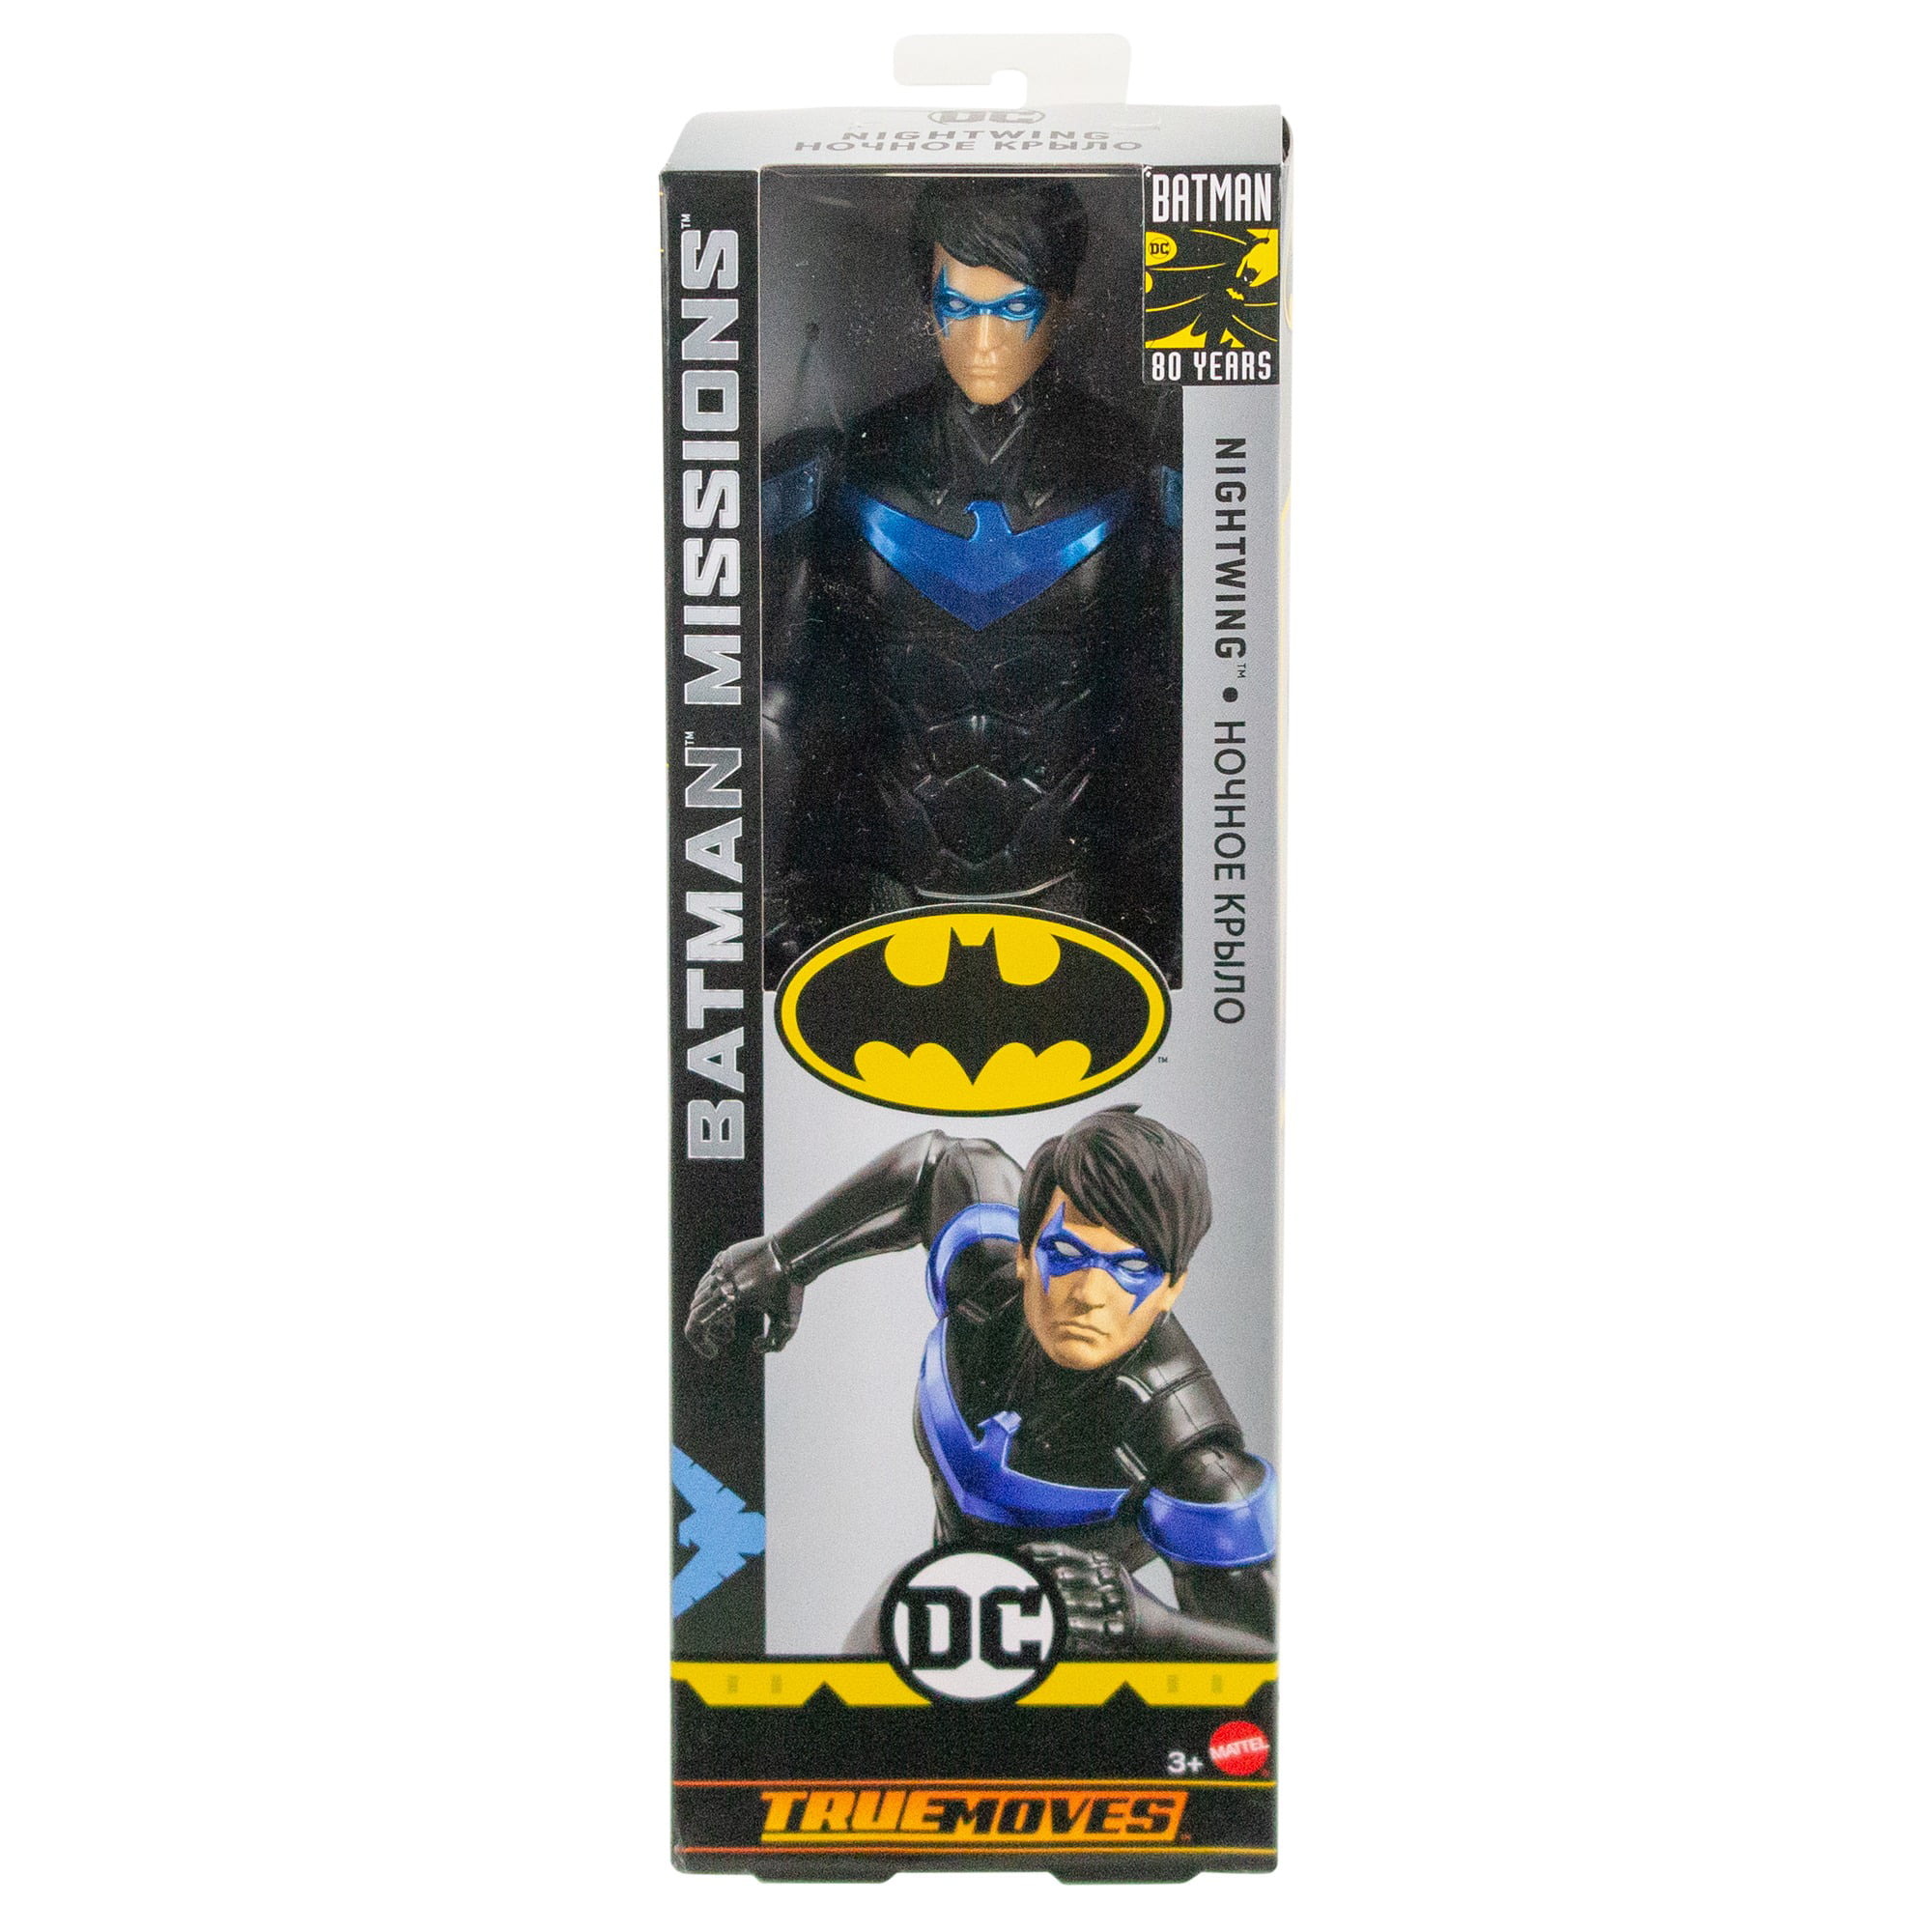 nightwing 12 inch action figure